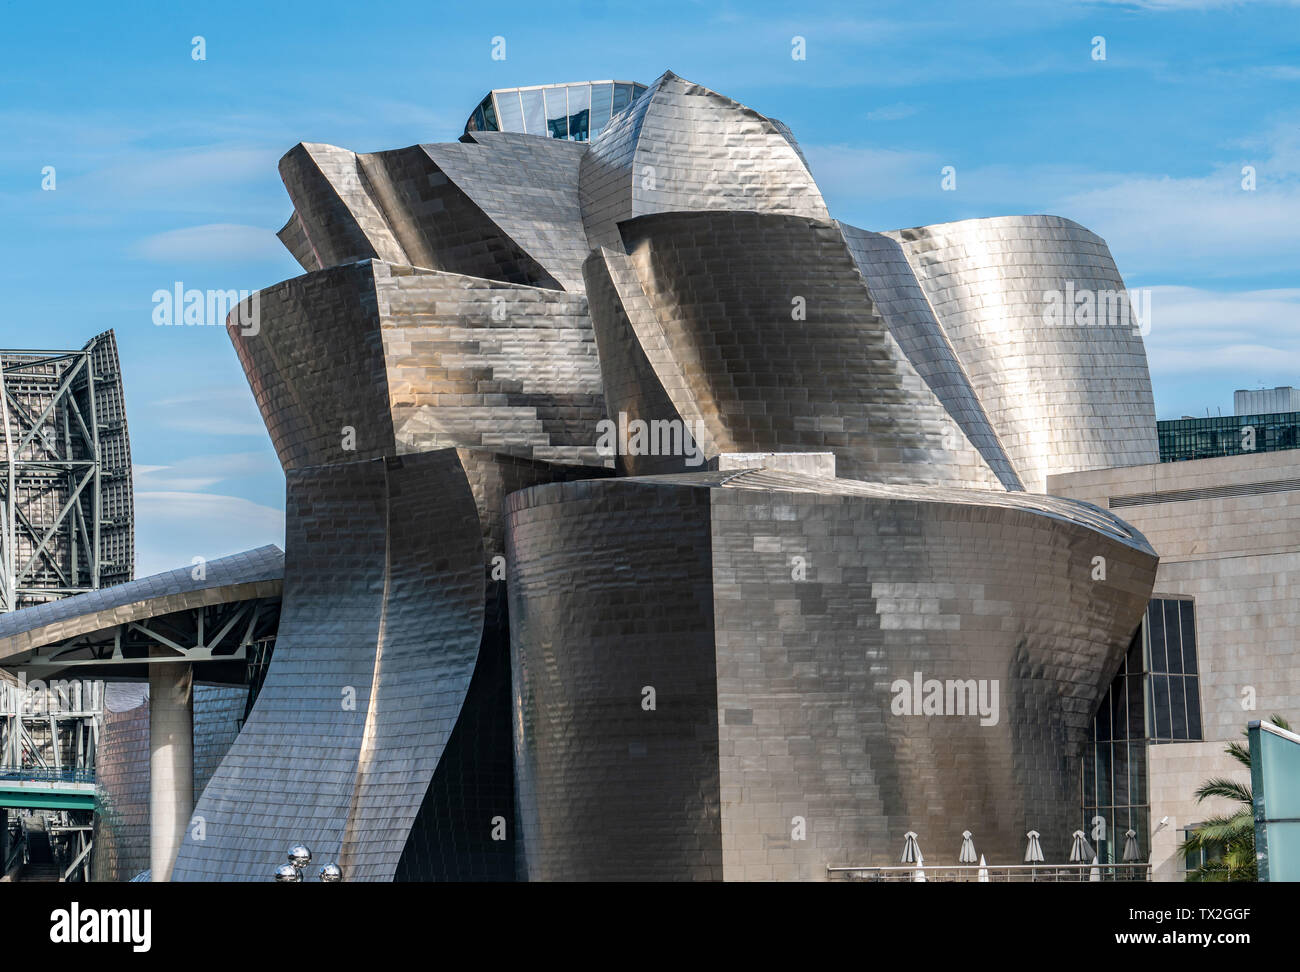 Learn About Frank Gehry Architecture, One of the Most Iconic Architects